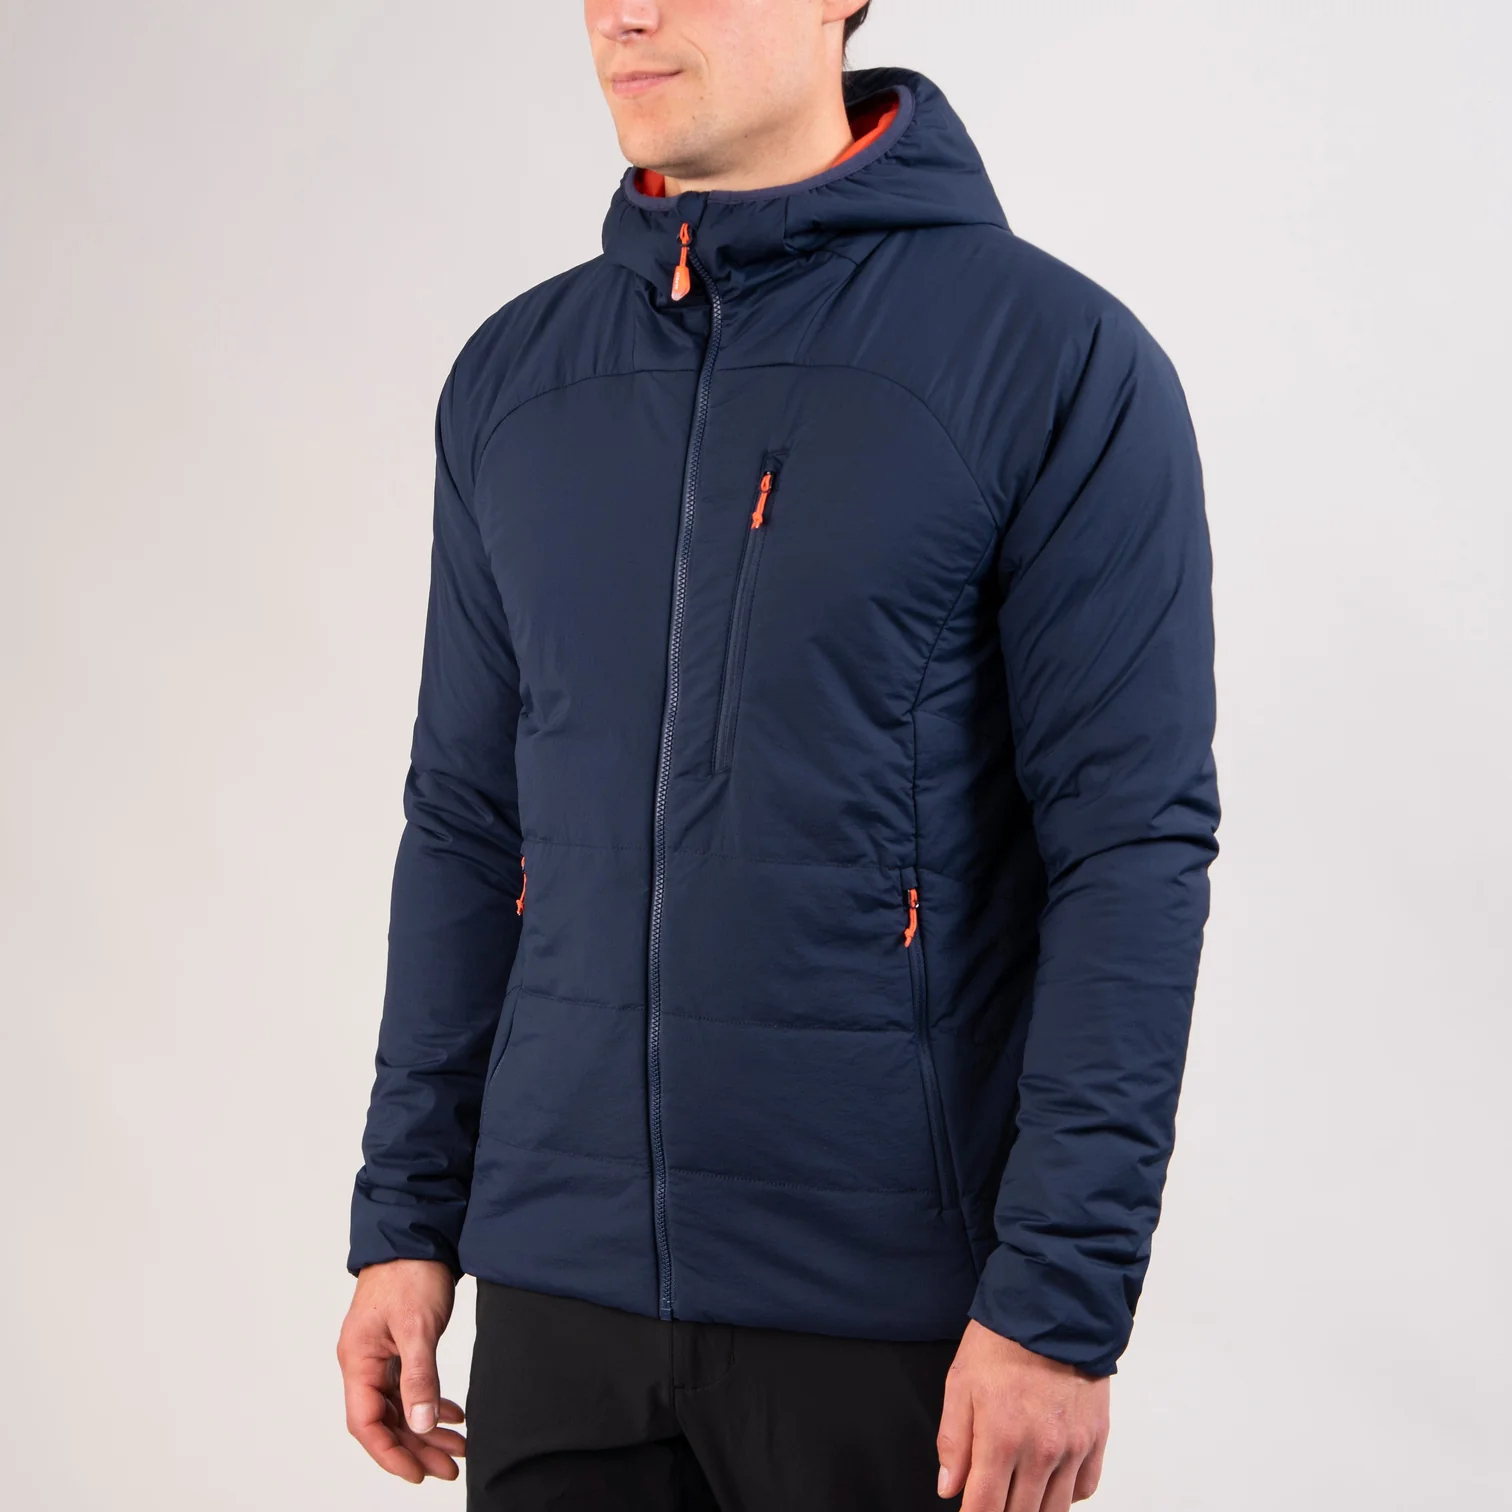 NEW STYLE BREATHABLE AND WATERPROOF MENS INSULATED JACKET